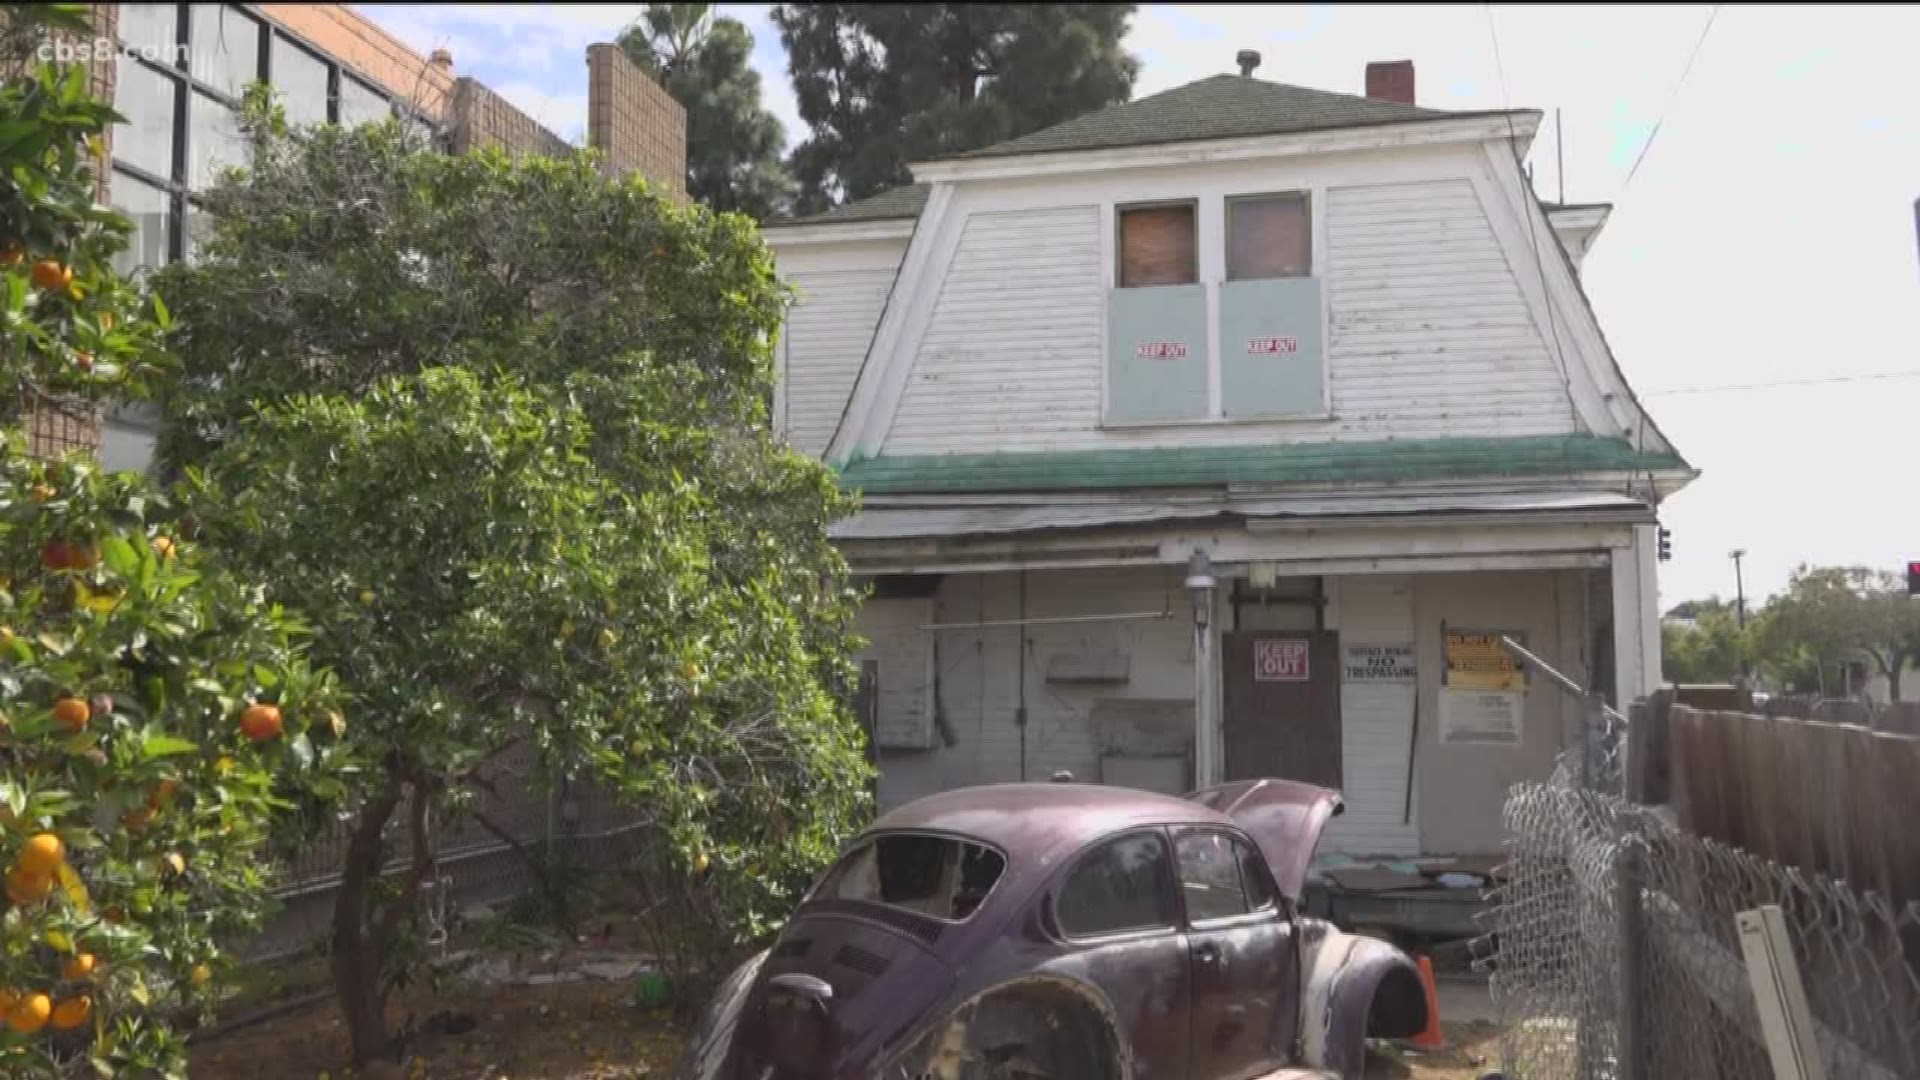 A historic home that has been in Pacific Beach for 114 years is now up for sale.